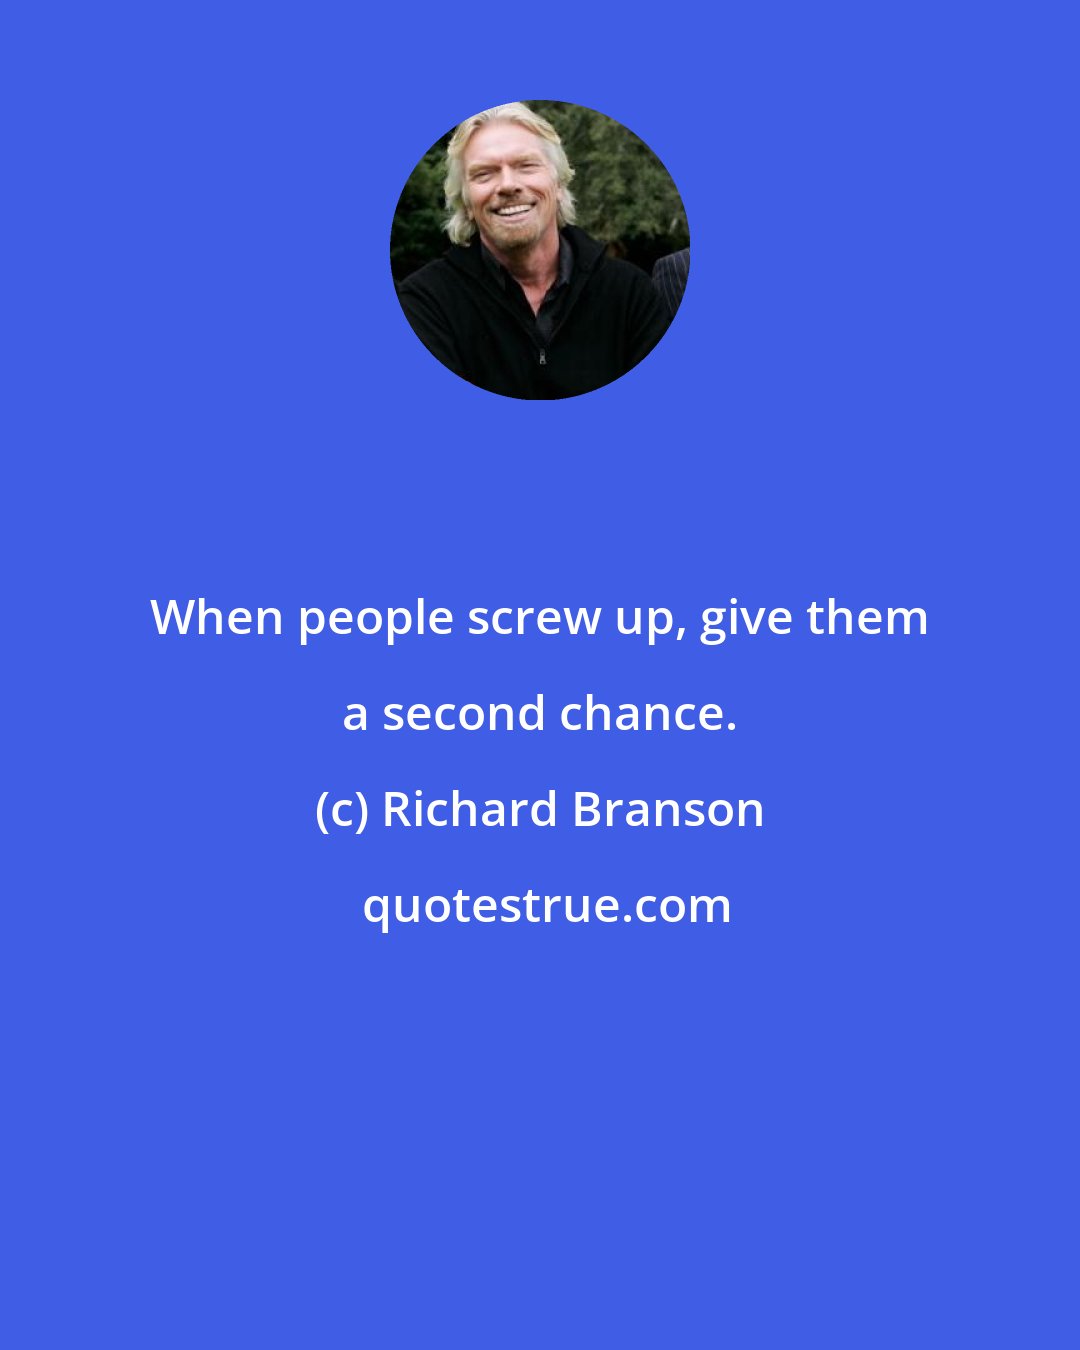 Richard Branson: When people screw up, give them a second chance.